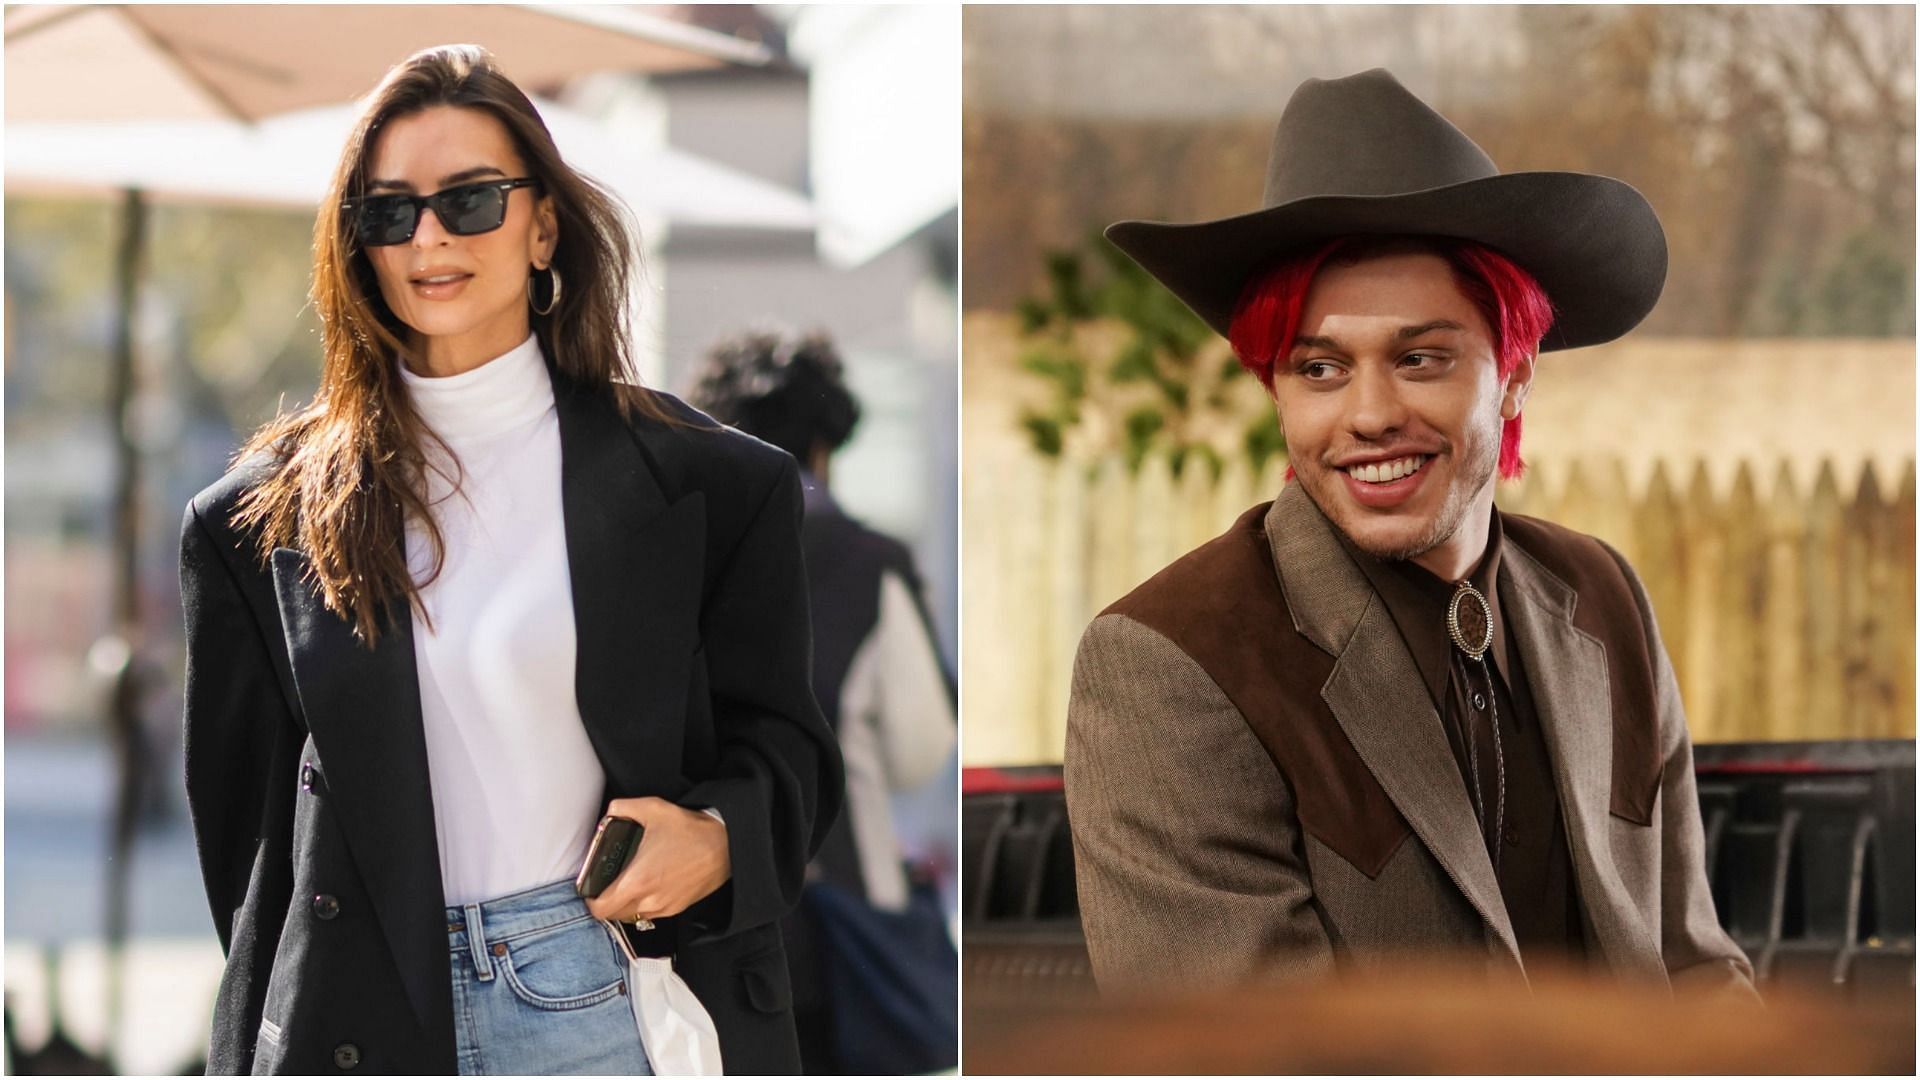 Emily Ratajkowski passed some great compliments for Pete Davidson (Images via Getty Images)